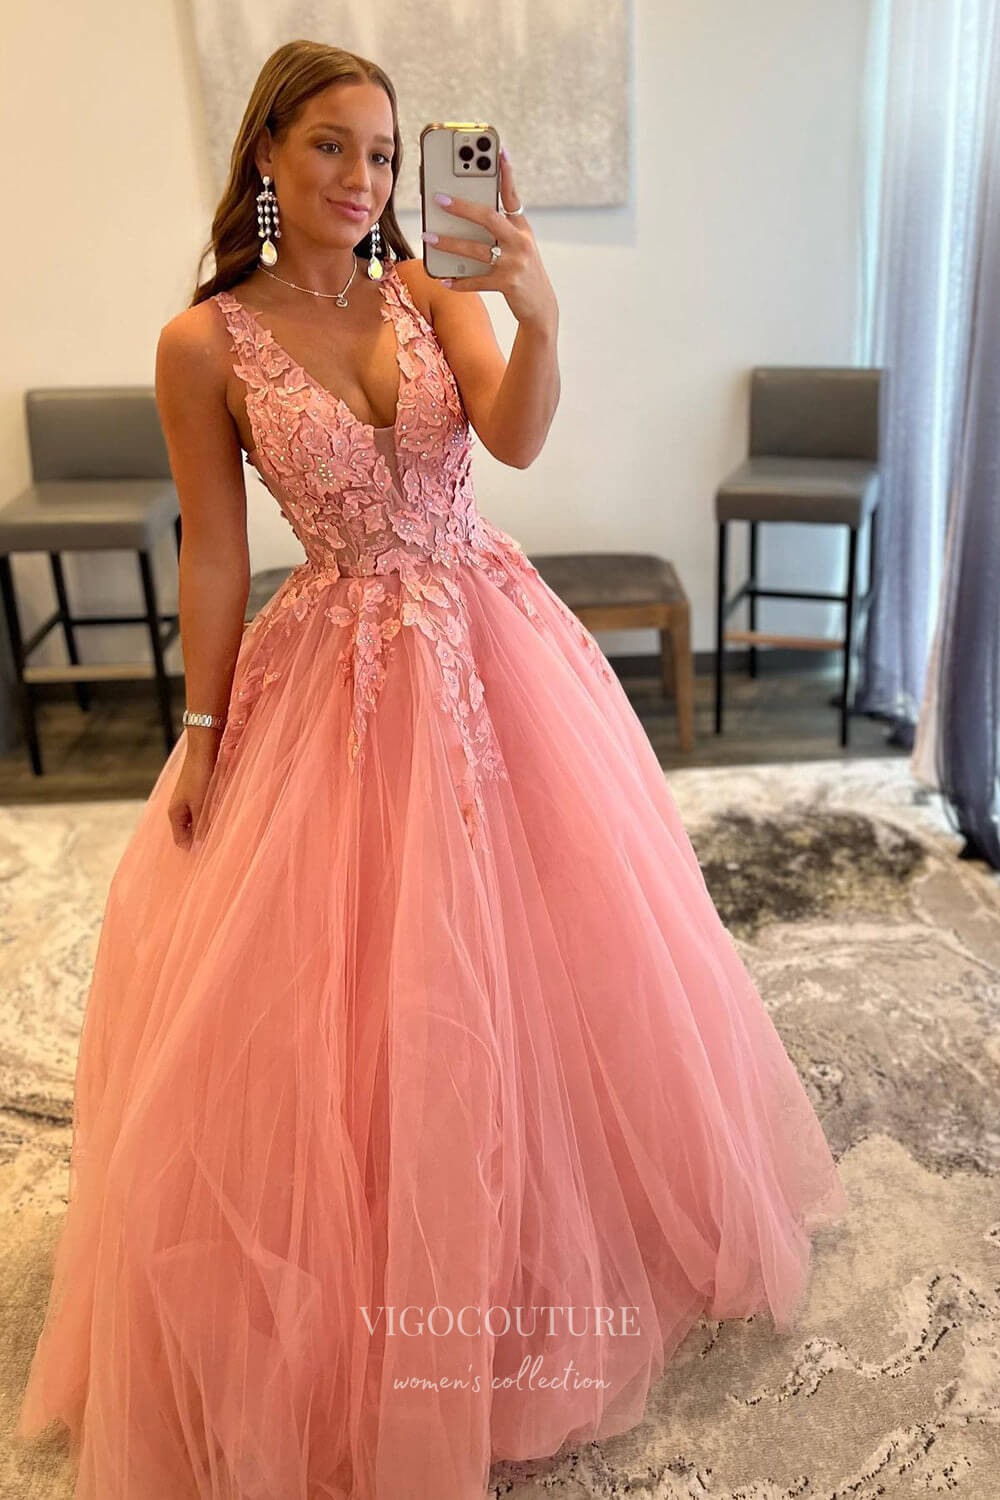 Deep V Neckline Blush Pink Prom Dresses with Crochet Style Lace Up Bac –  Siaoryne